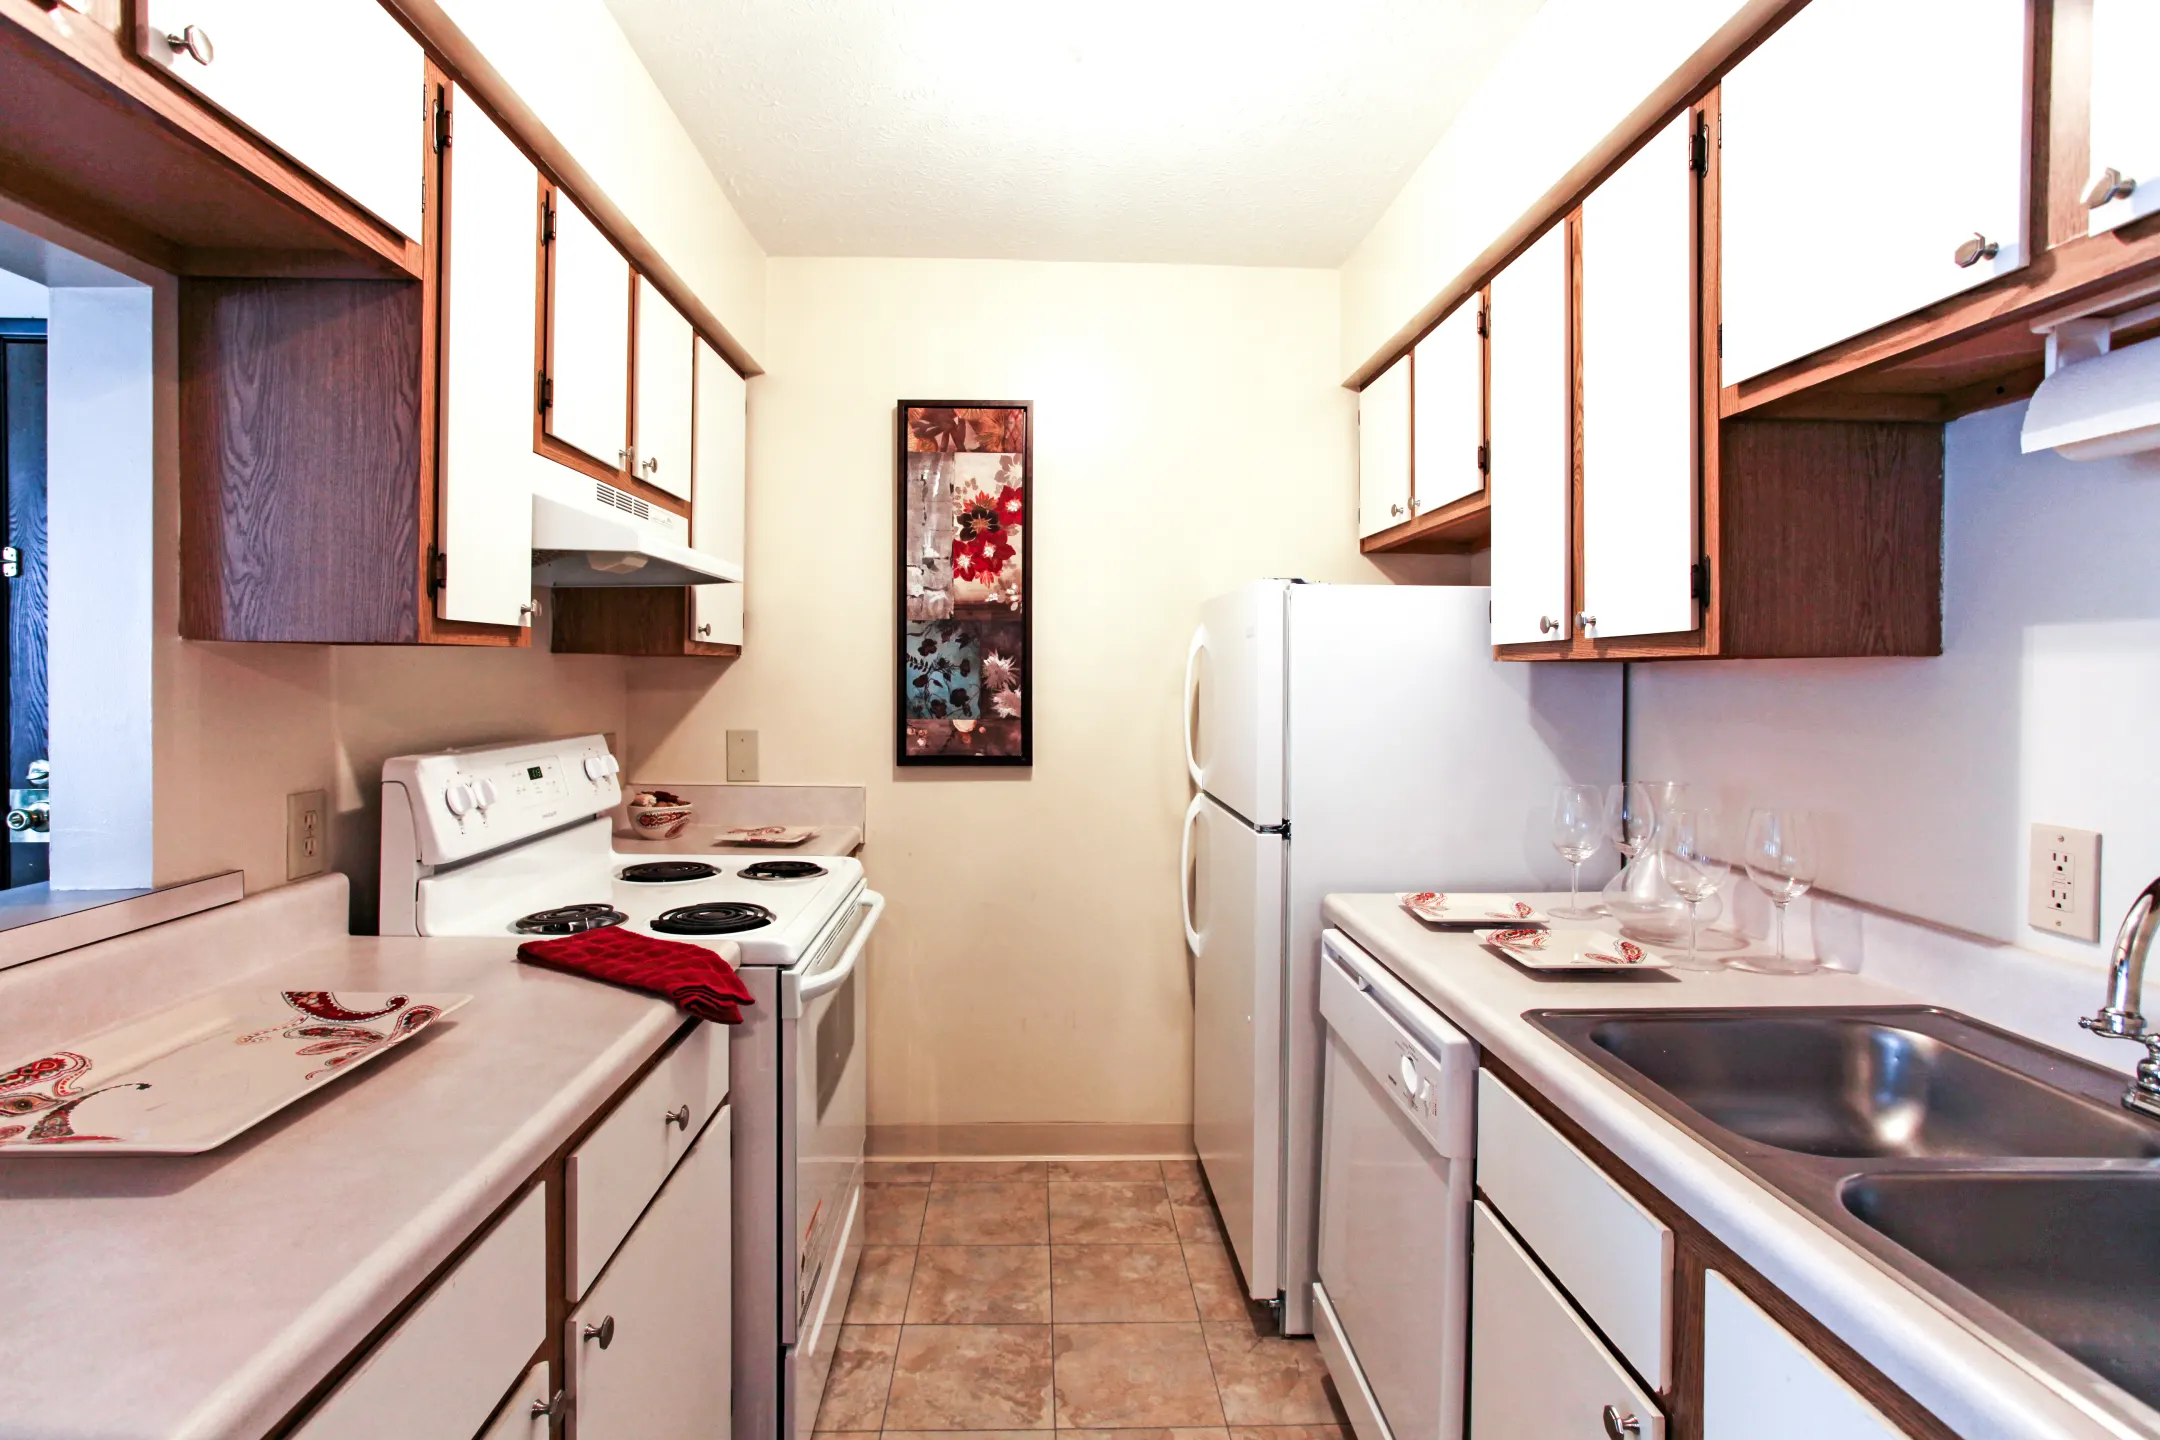 Kitchen - Bay Club Apartments - Willowick, OH